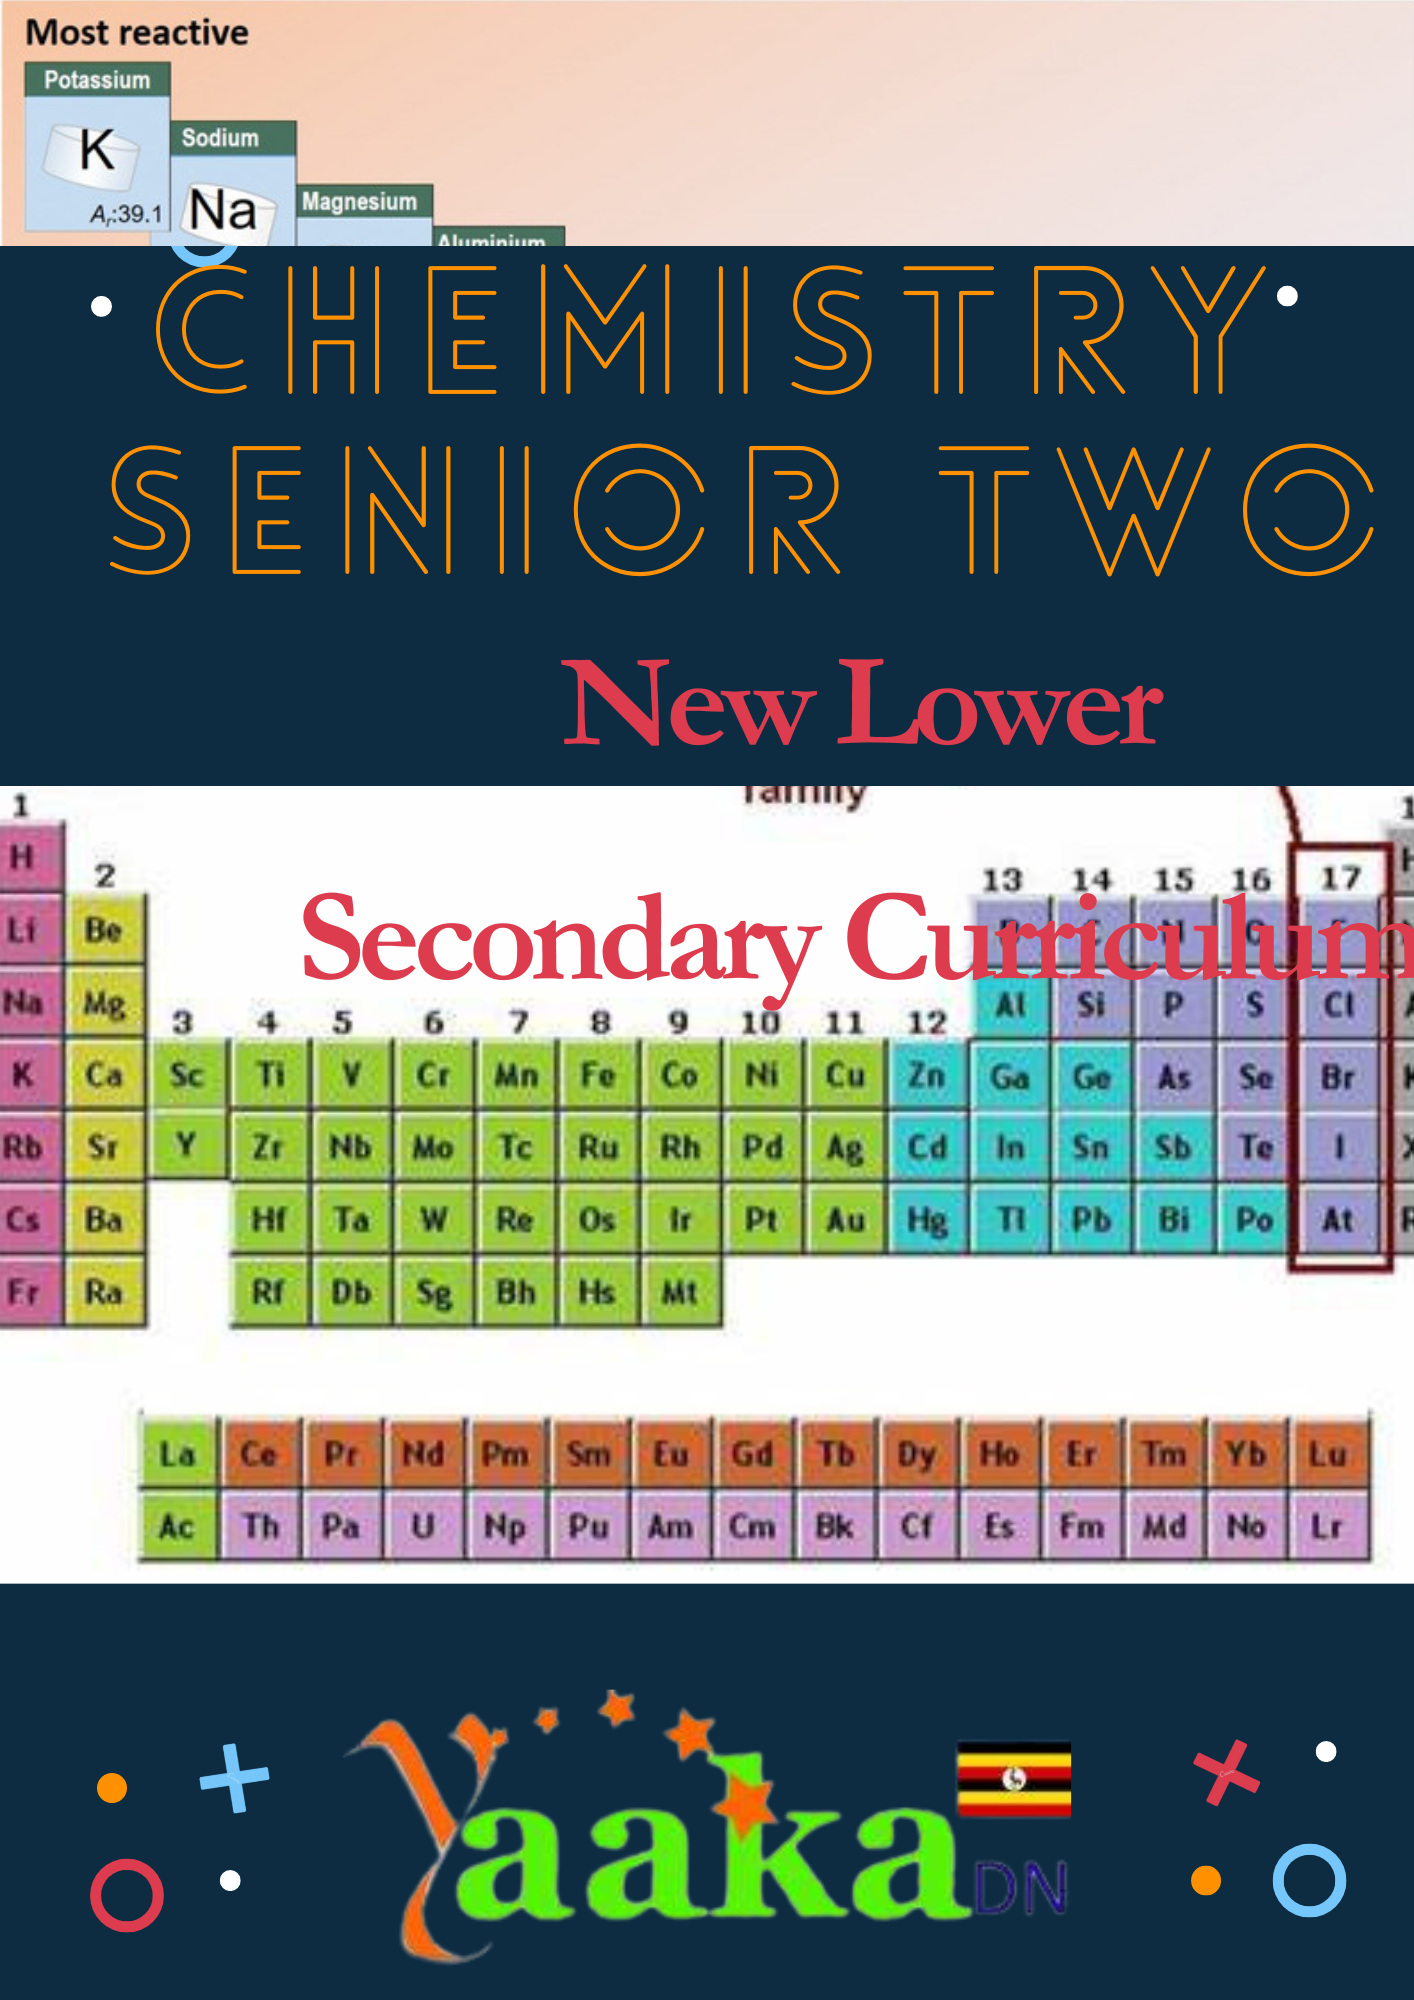 LOWER SECONDARY CURRICULUM CHEMISTRY SENIOR TWO